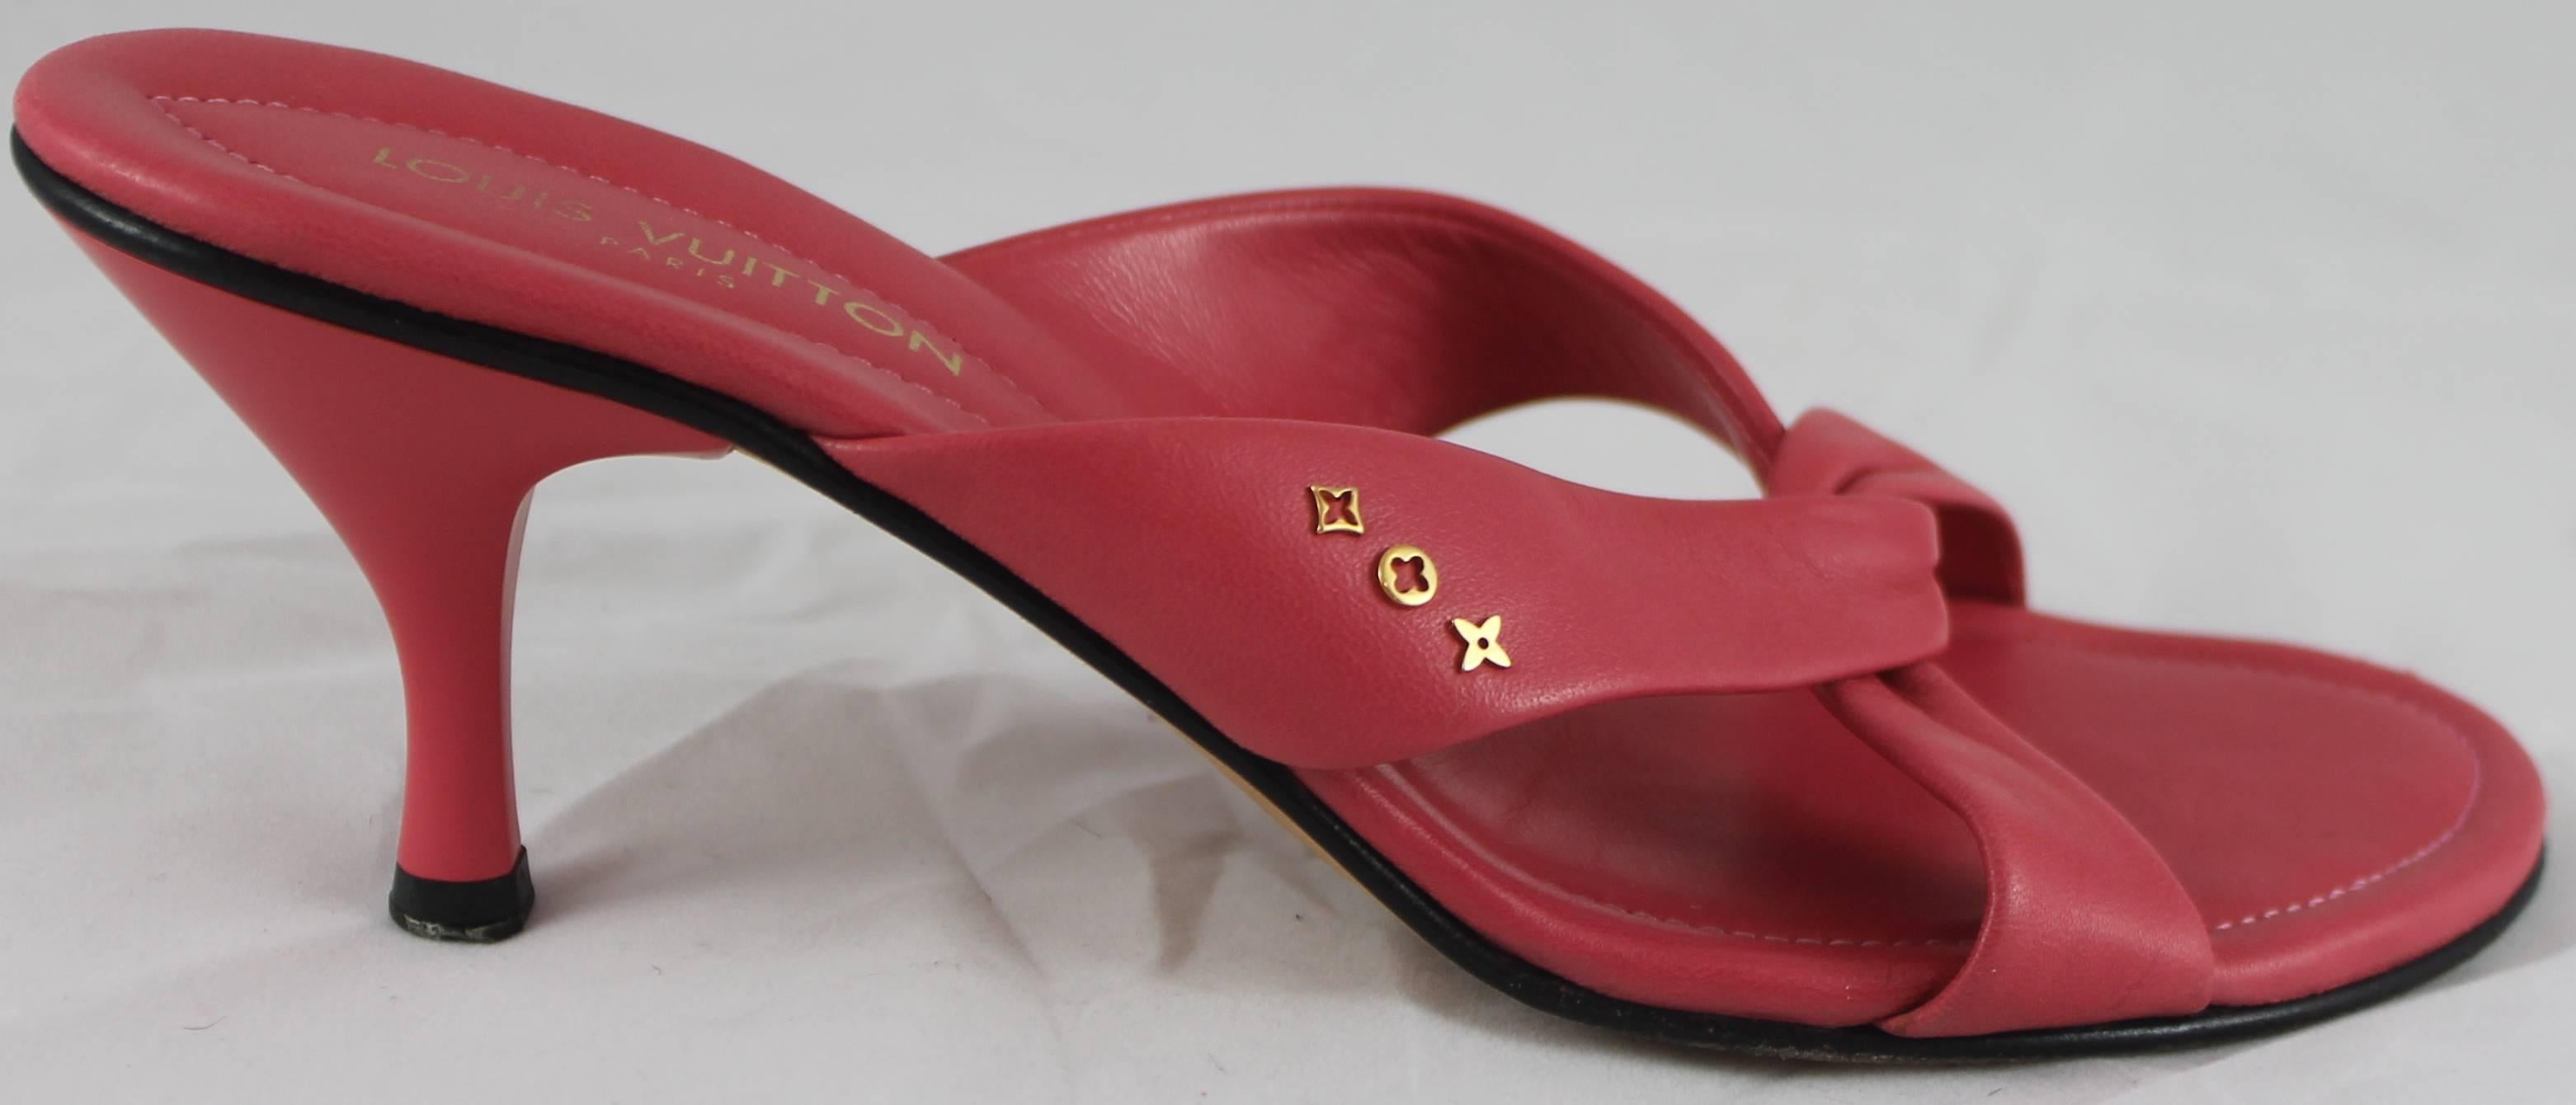 Heels Louis Vuitton Red Bottom Shoes - 3 For Sale on 1stDibs  louis  vuitton shoes with red soles, red bottom louis vuitton, louis vuitton heels  red bottom